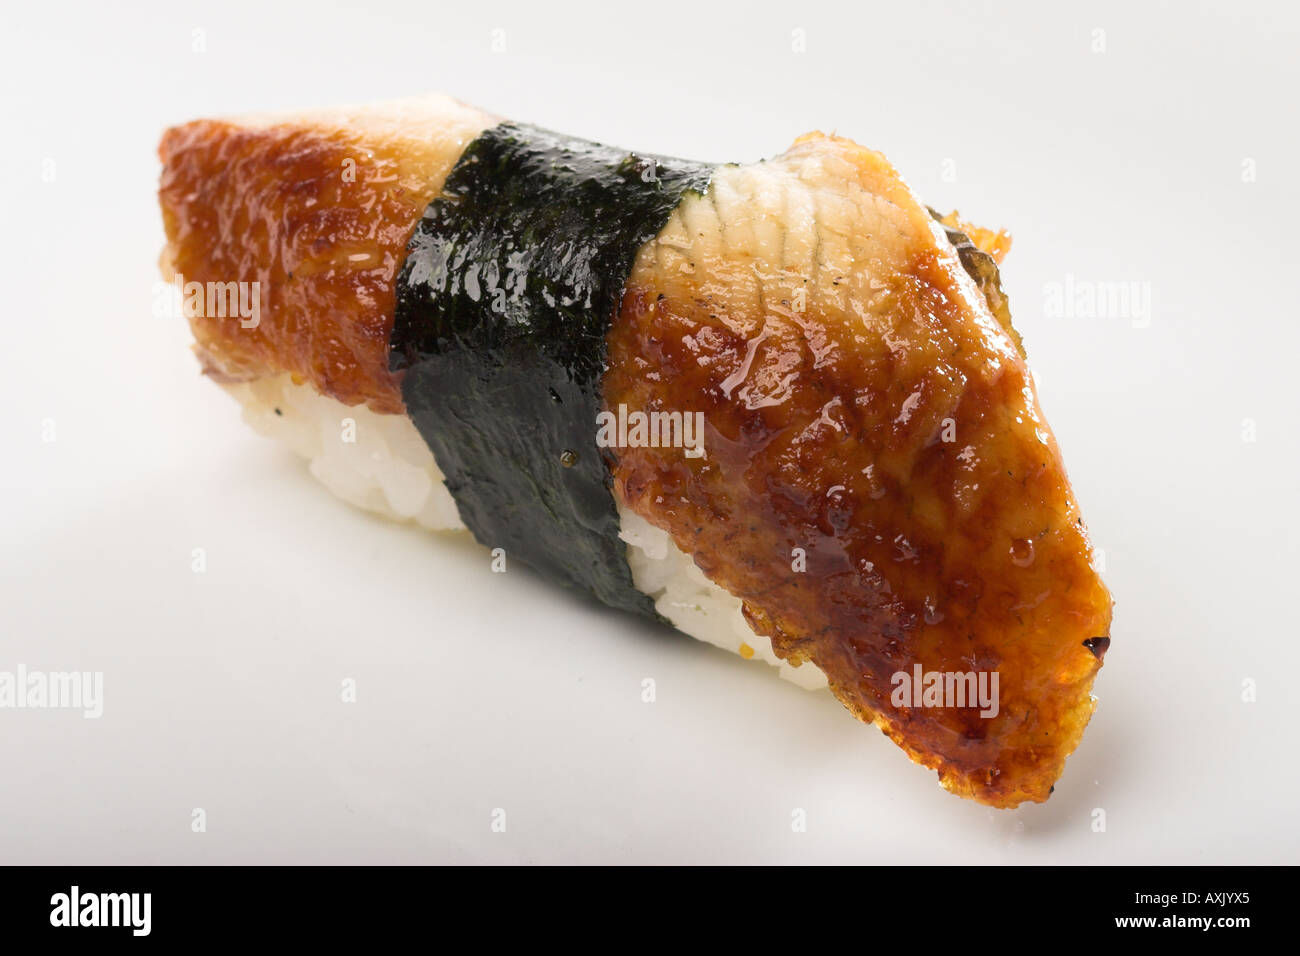 unagi eel fresh seafood brown white fish seaweed rice rapped appetizer meal Asian consumption eat food Stock Photo